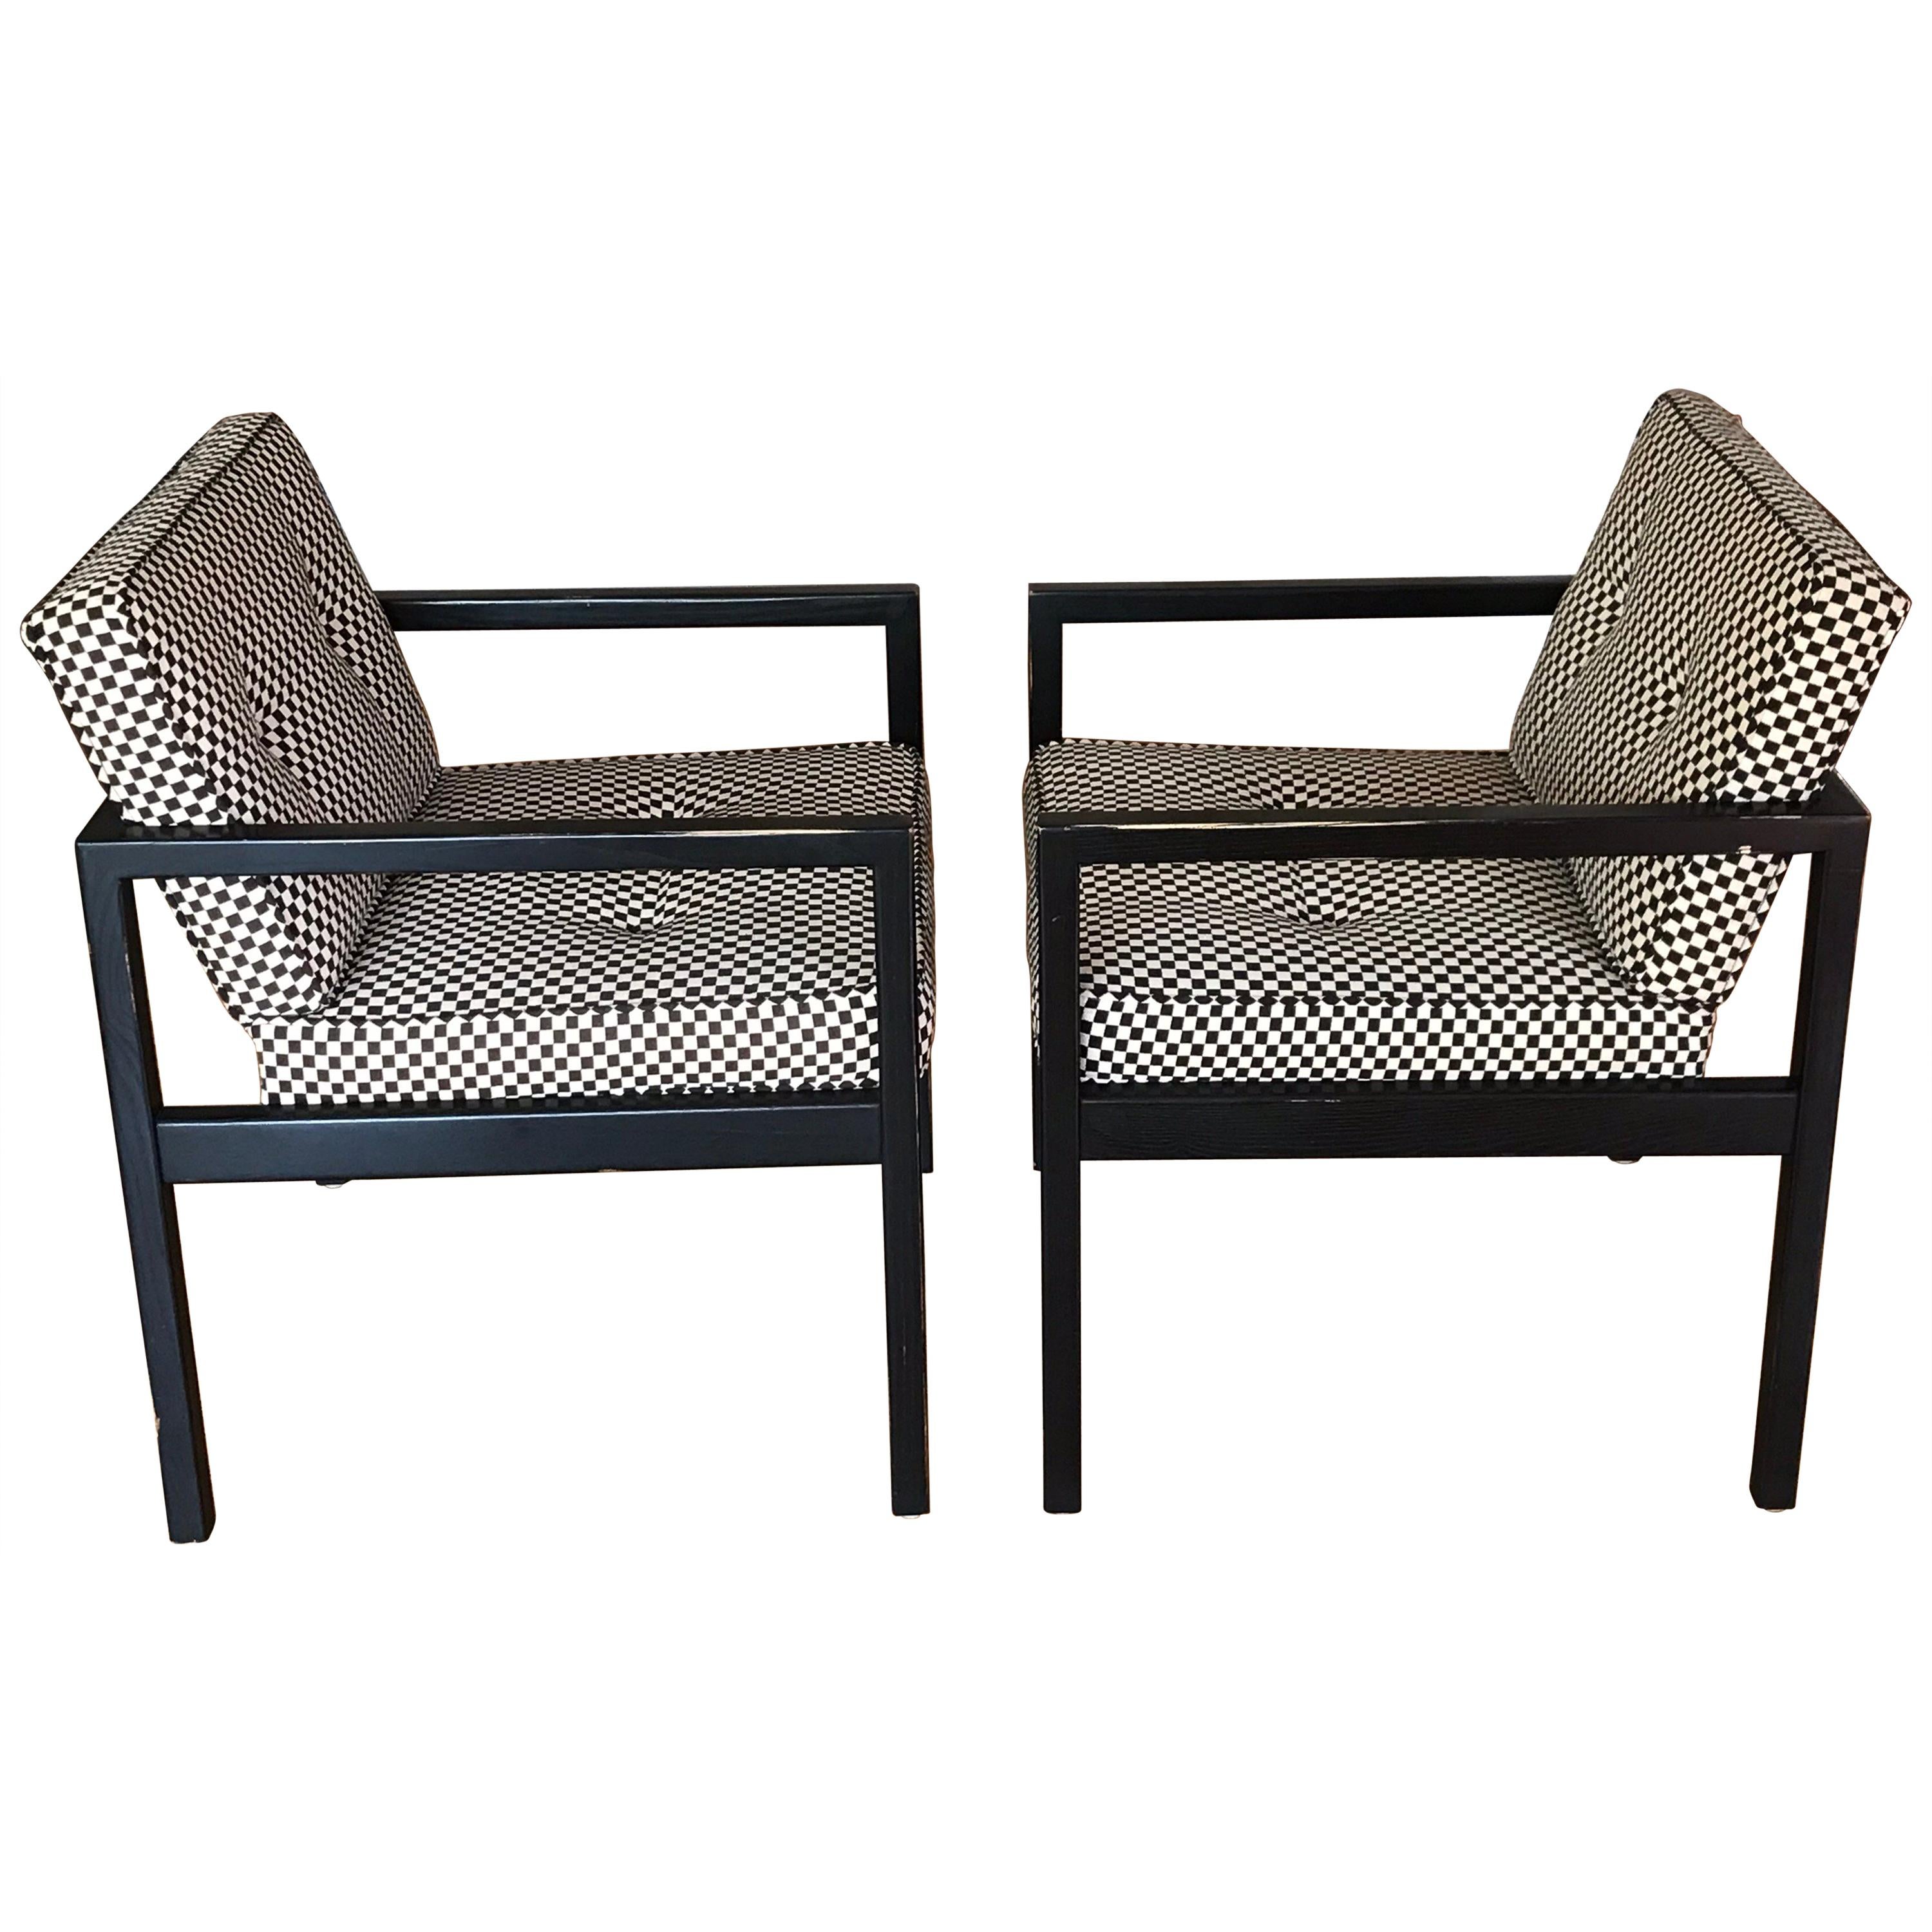 George Nelson Architectural Wood Frame Chairs with Alexander Girard Fabric